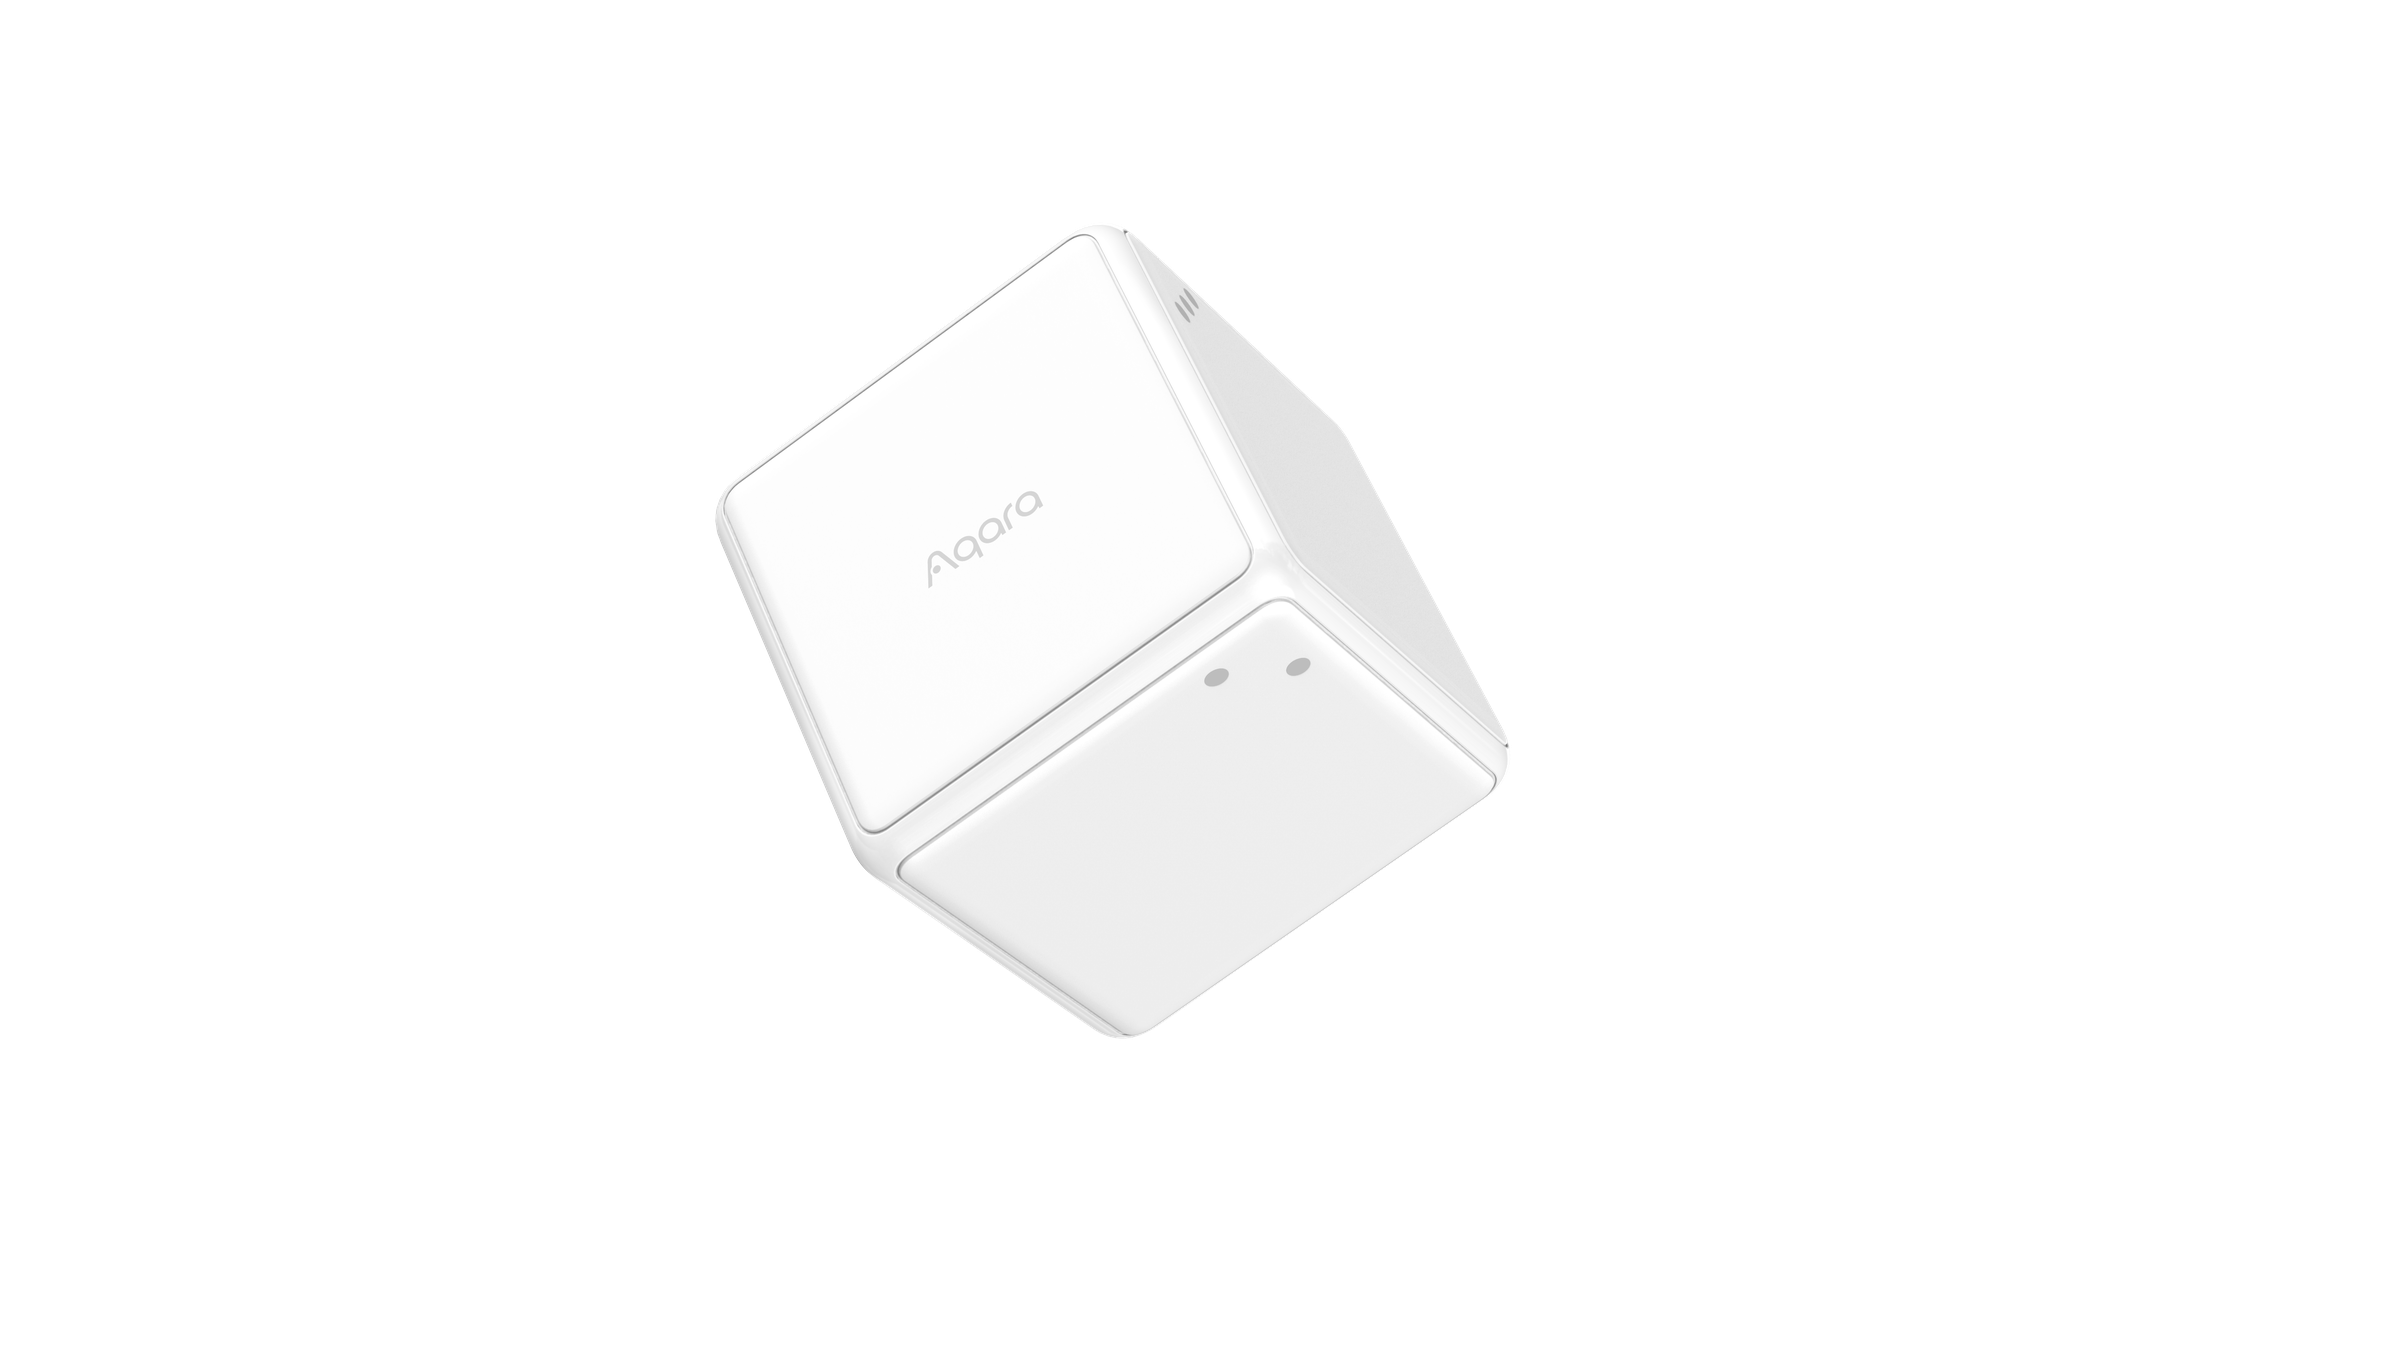 The Aqara Cube T1 Pro has six-sides and features dice-like identifiers to control your smart home Scenes and devices.